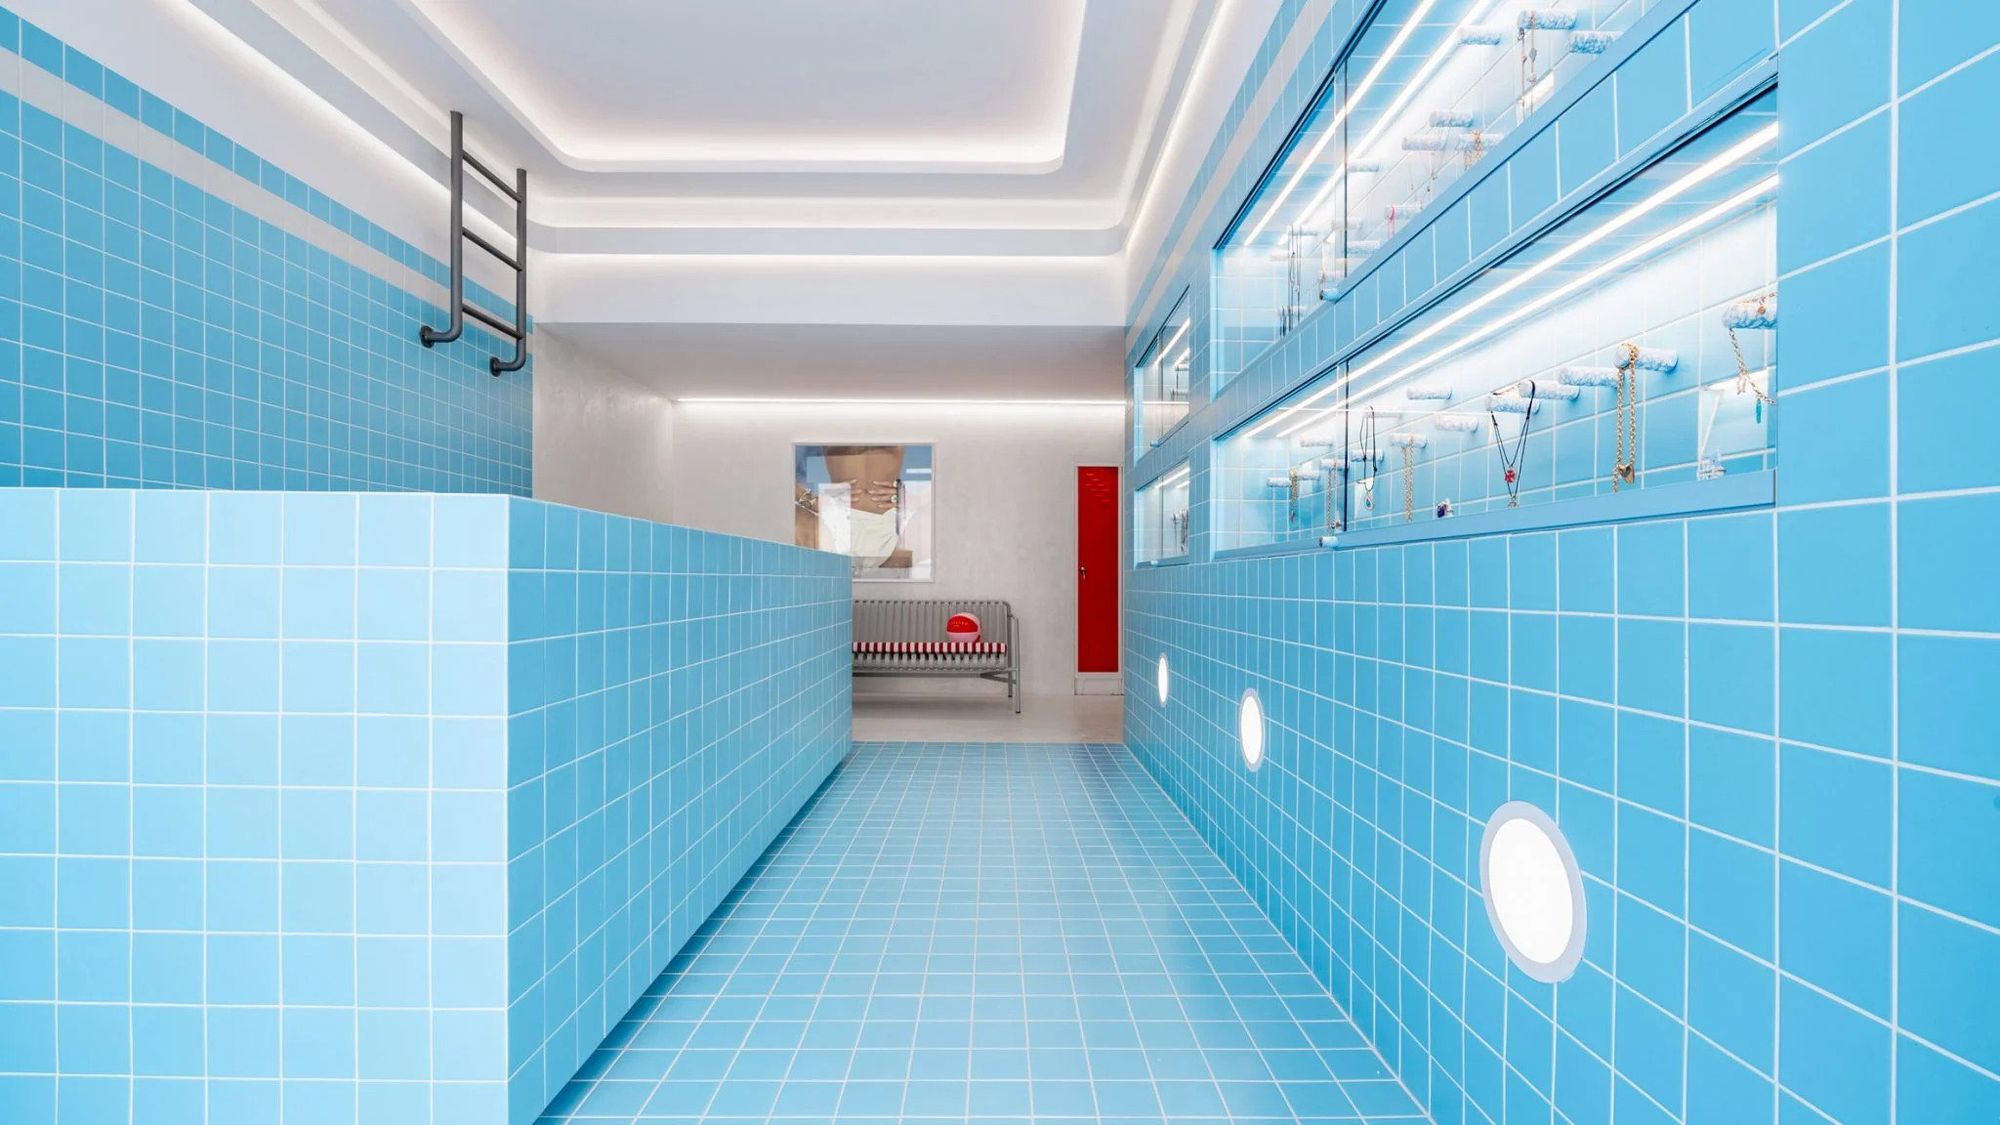 Jewelry store or swimming pool? - Surreal interior design from Mykonos